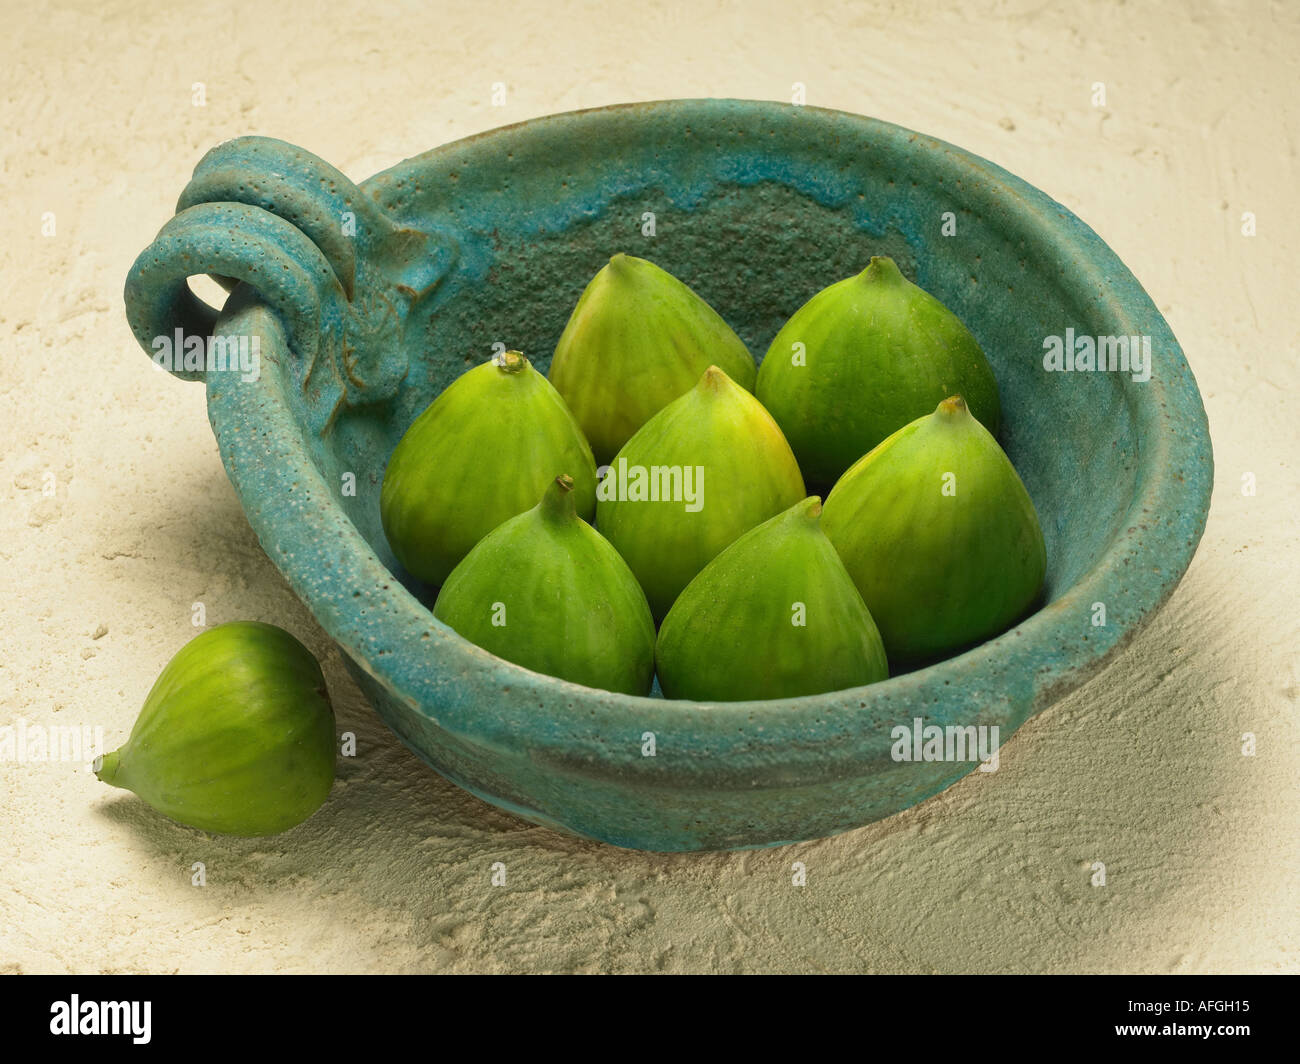 GREEN FIGS IN BLUE BOWL Stock Photo